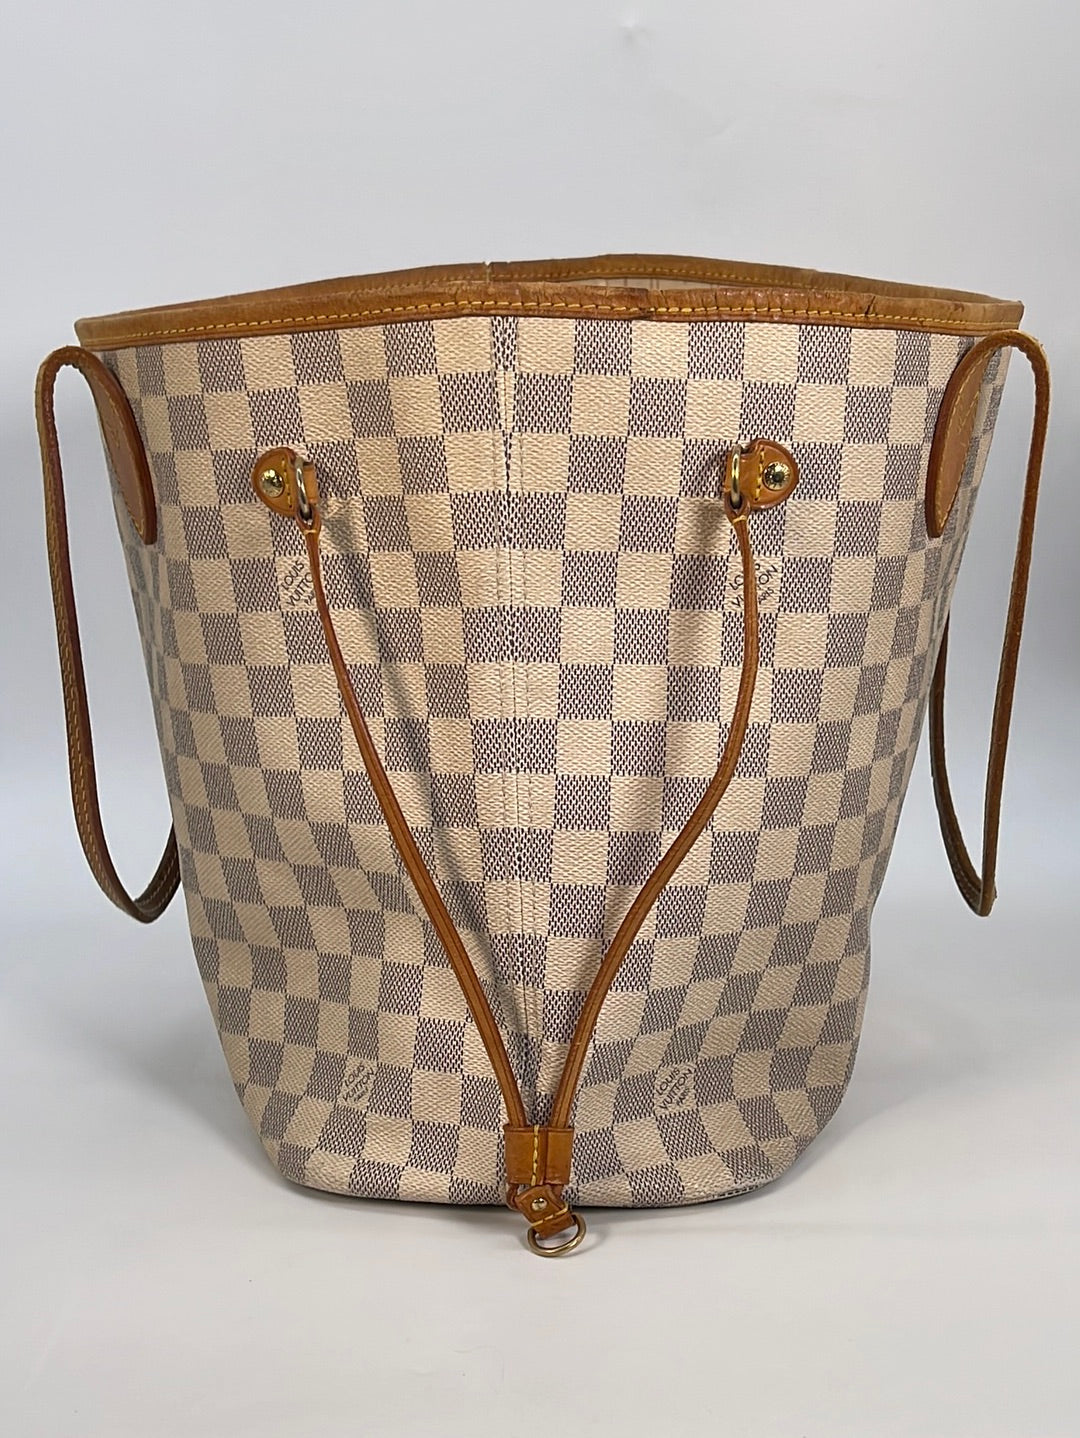 Preloved Louis Vuitton Damier Azur Neverfull MM Tote AR4079 012323 ** DEAL** - $400 OFF